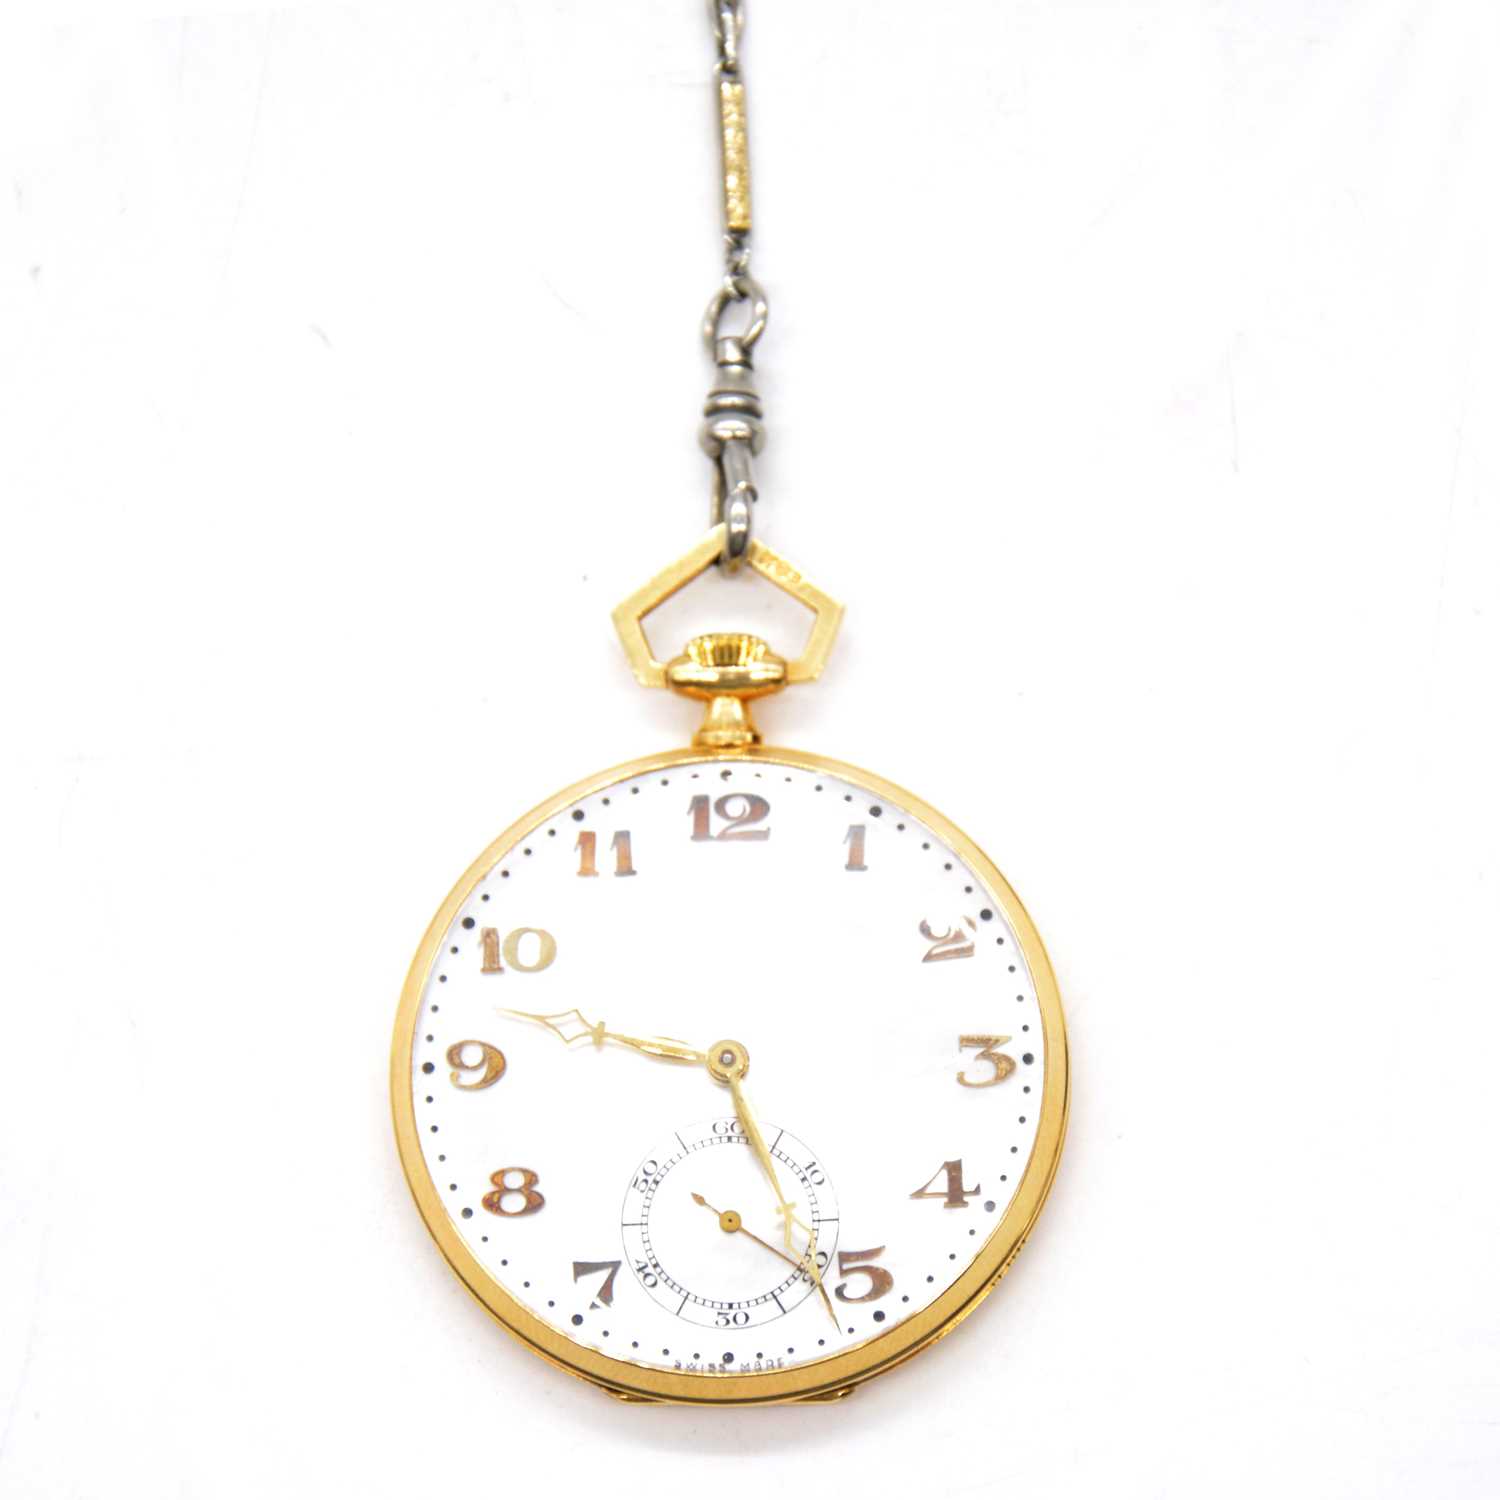 Lot 281 - An 18 carat yellow gold open face pocket watch and yellow and white metal Albert watch chain.